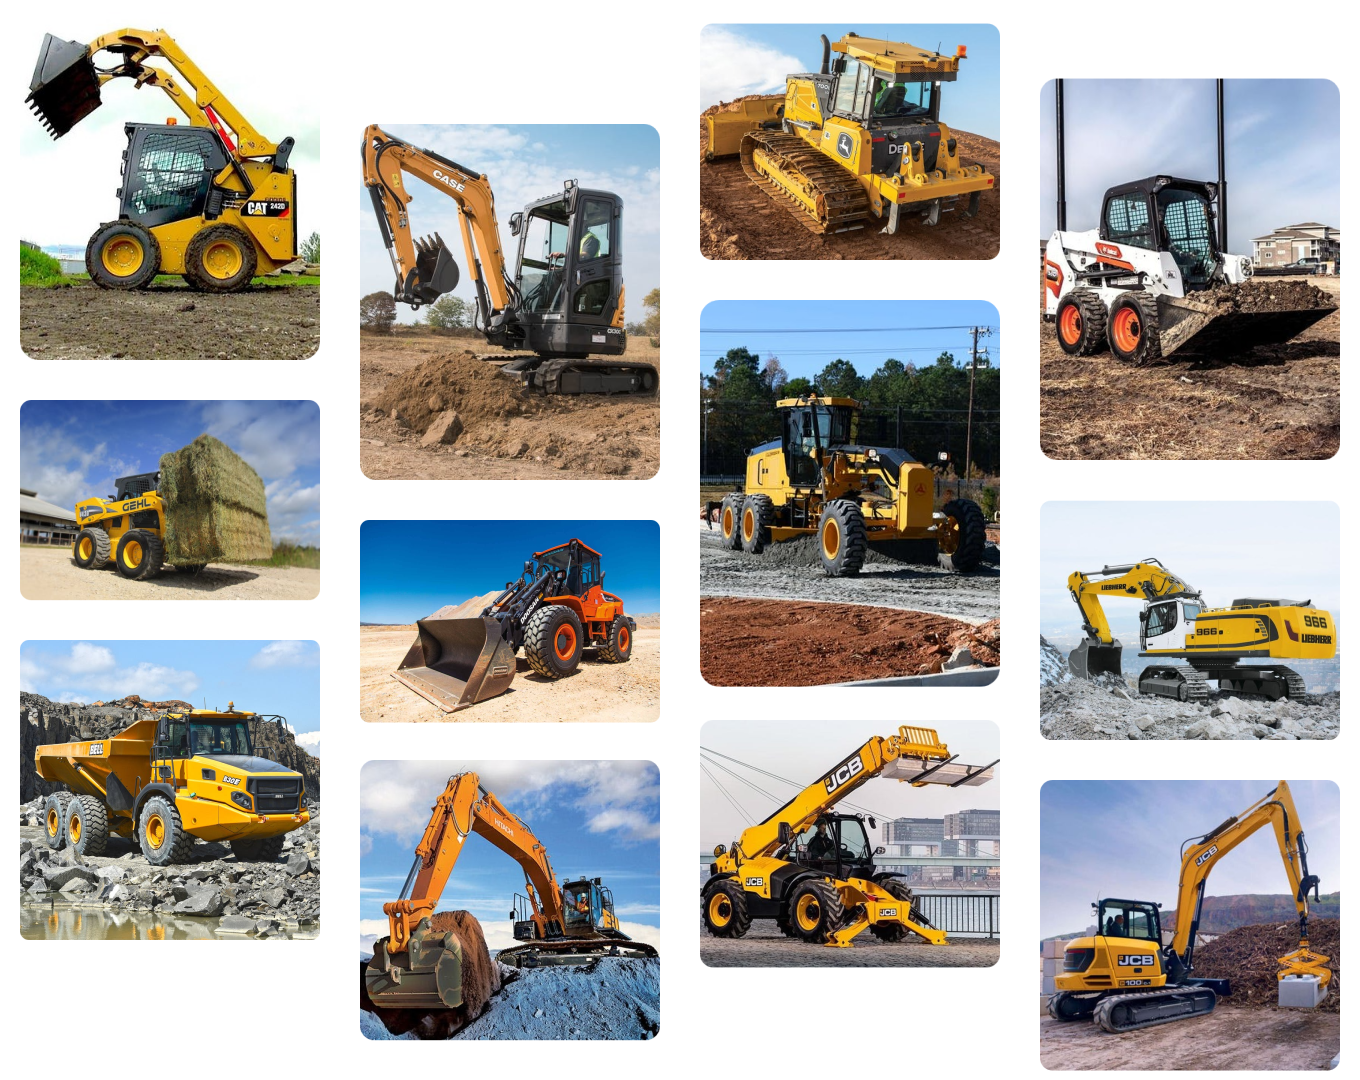 A collage of various types of heavy construction equipment from different manufacturers